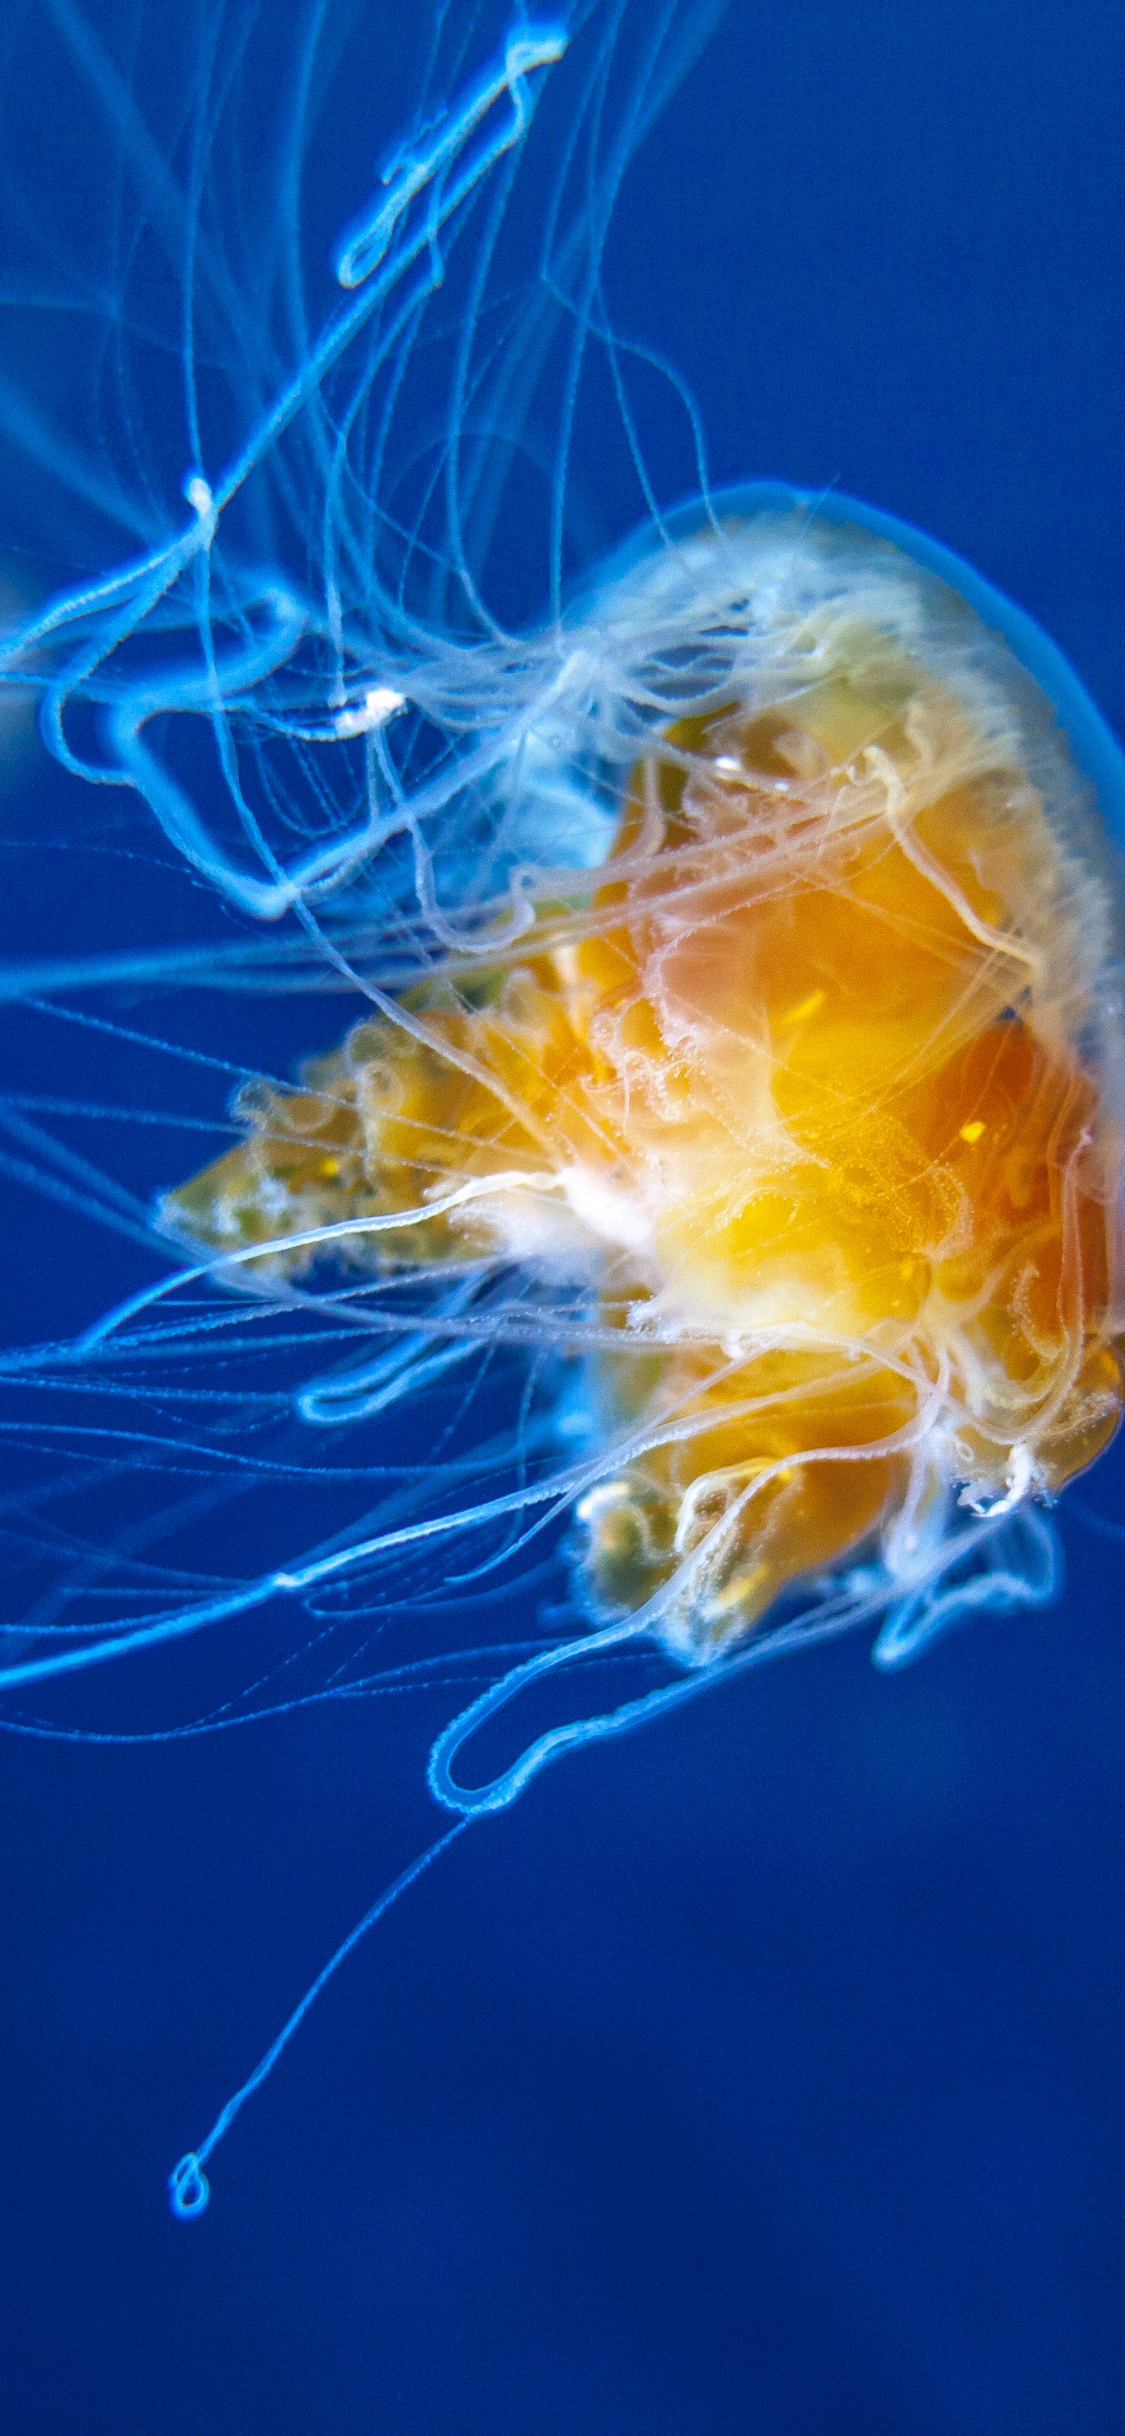 Yellow and White Jellyfish in Blue Water. Wallpaper in 1125x2436 Resolution